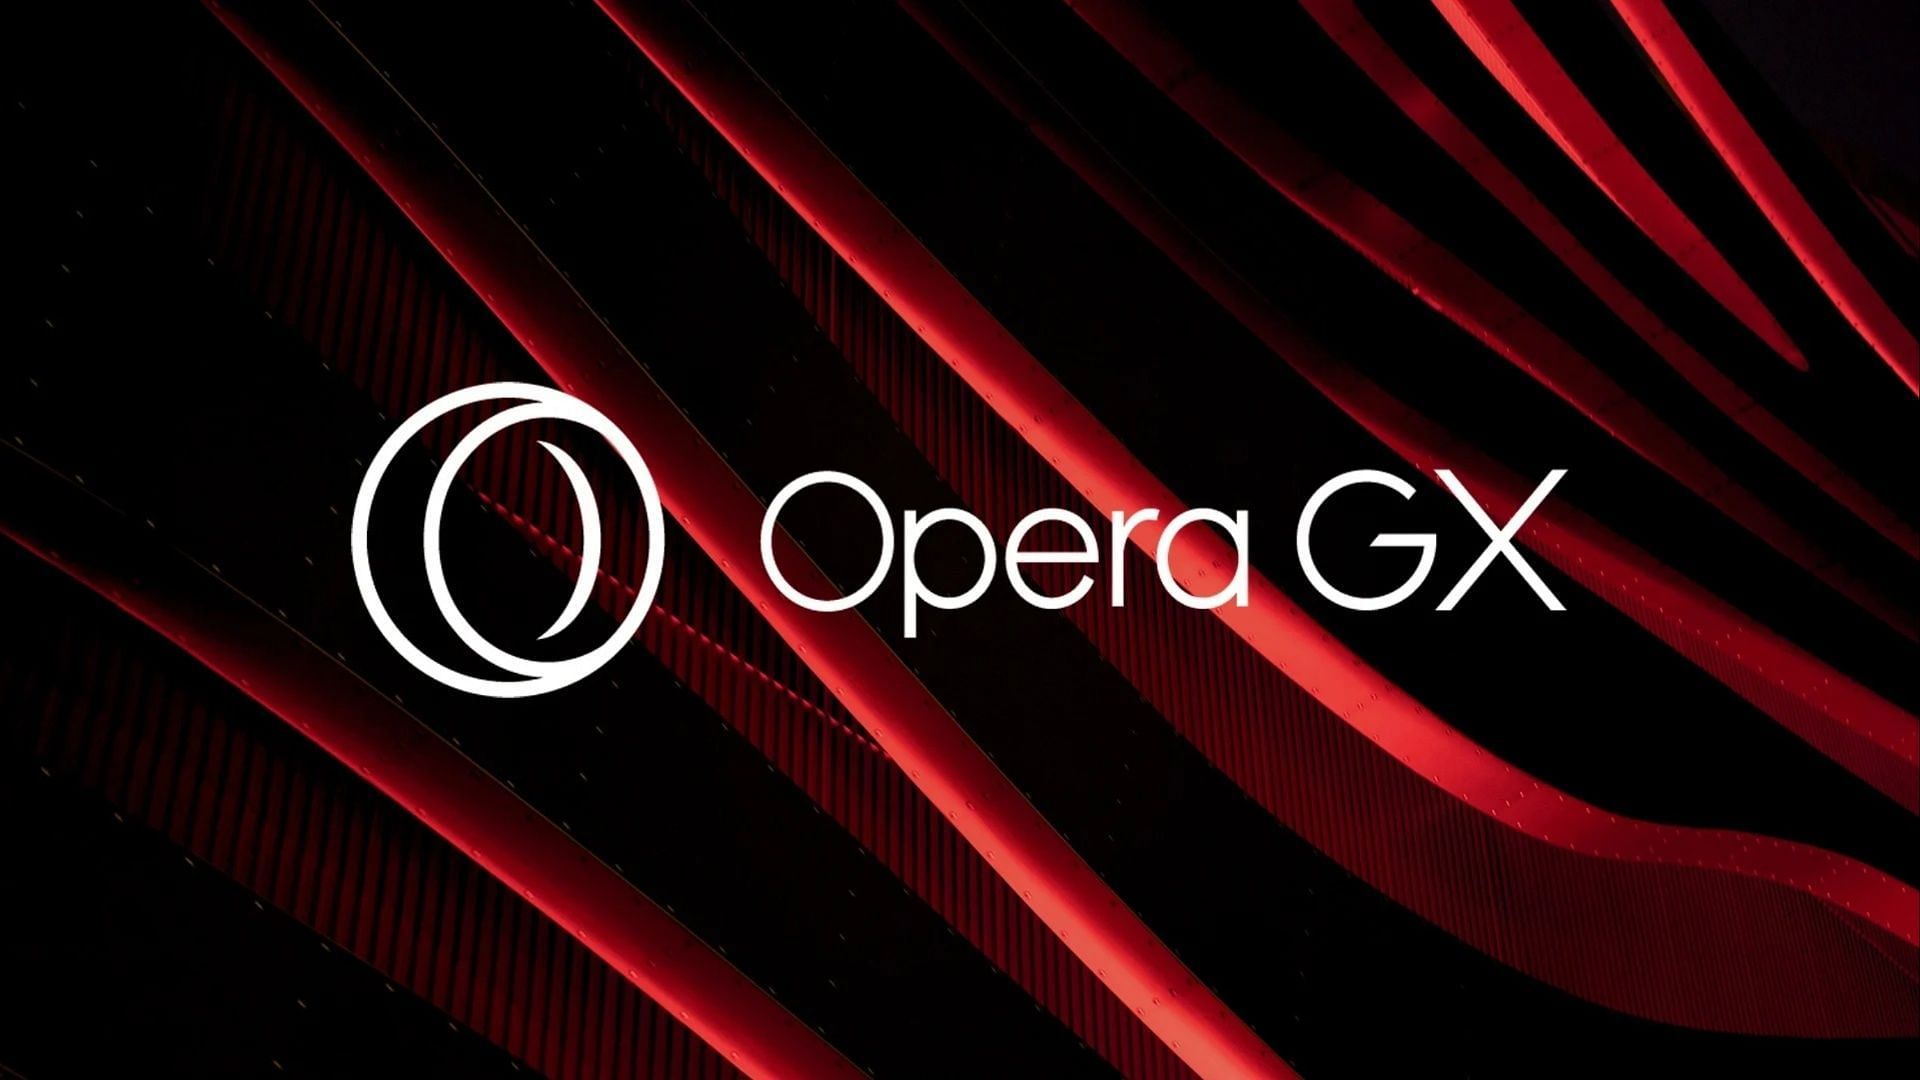 Opera GX "The browser for gaymers" Opera GX's Pride month logo leaves the in a frenzy